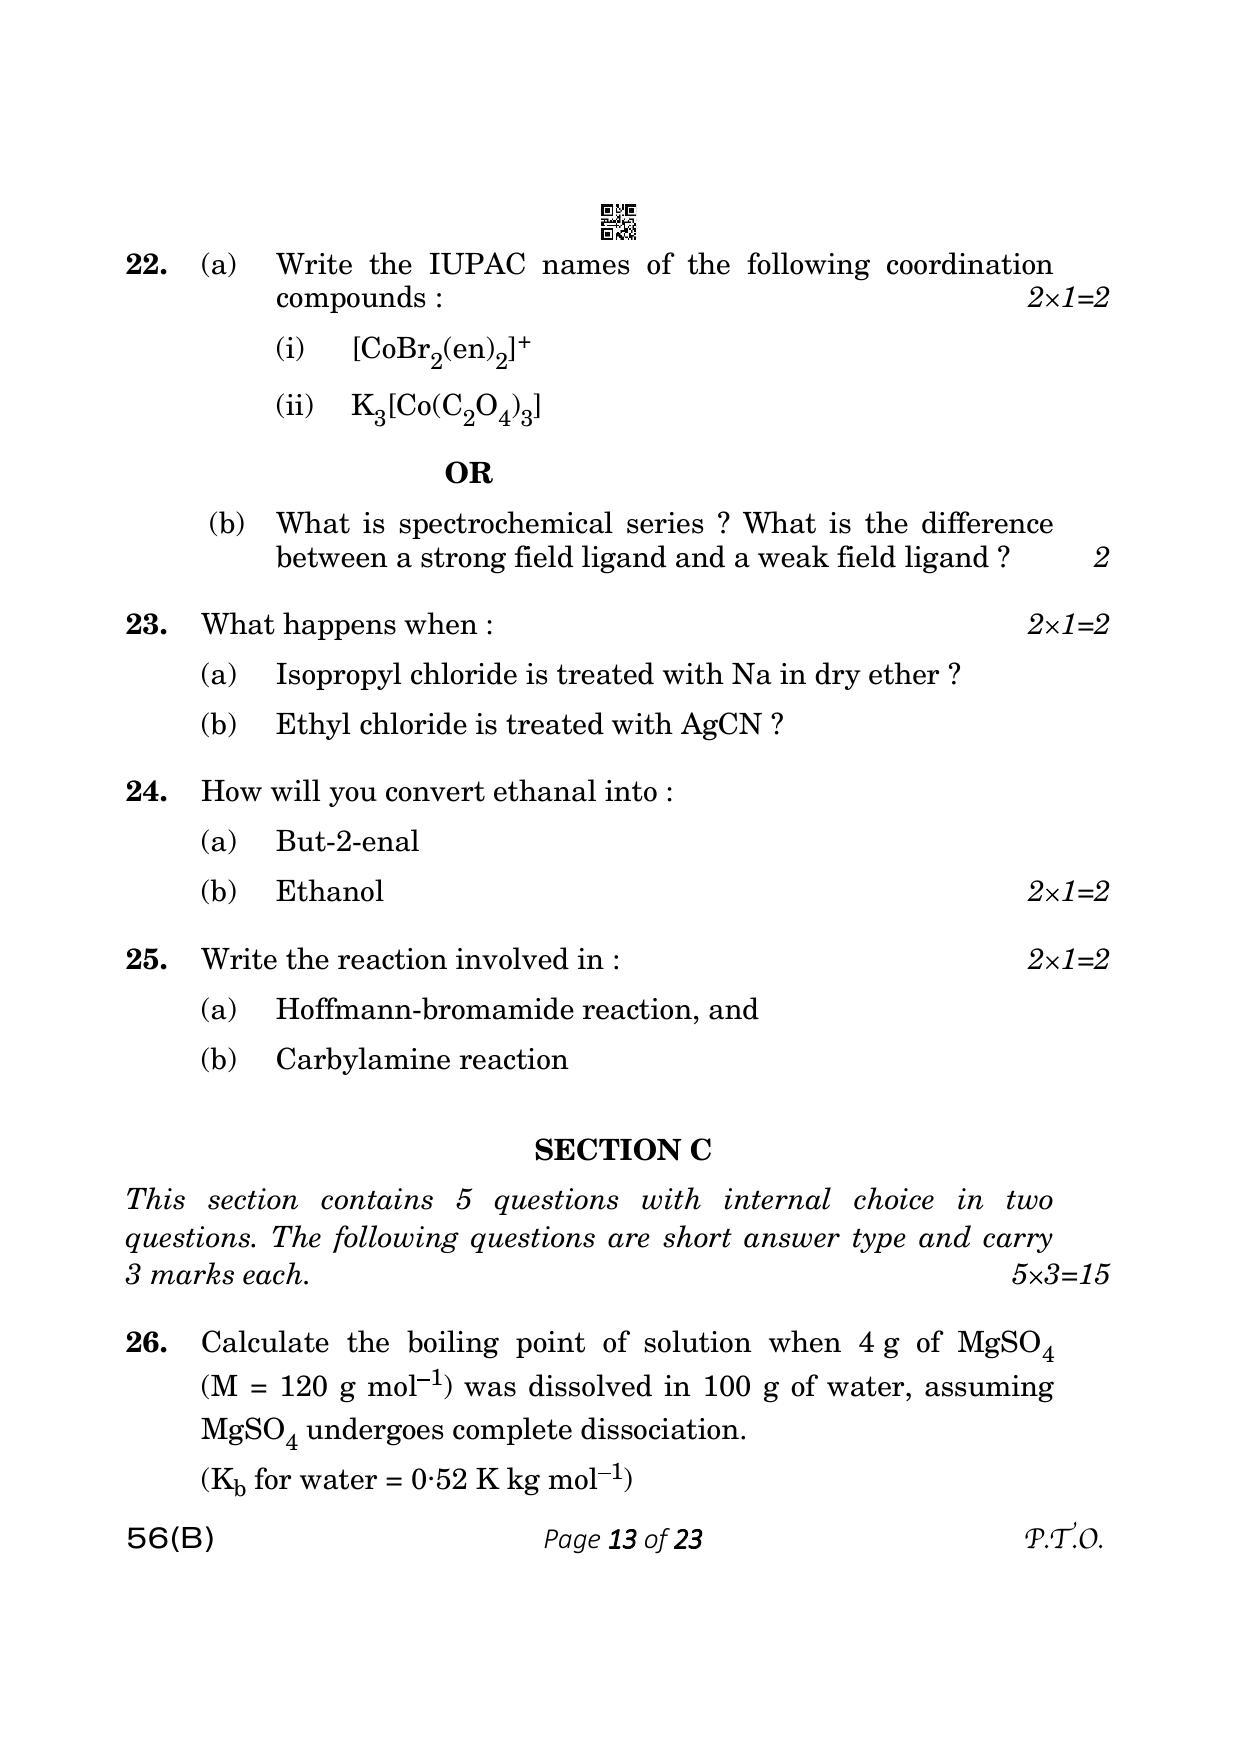 CBSE Class 12 56-B Chemistry 2023 (Compartment) Question Paper - Page 13